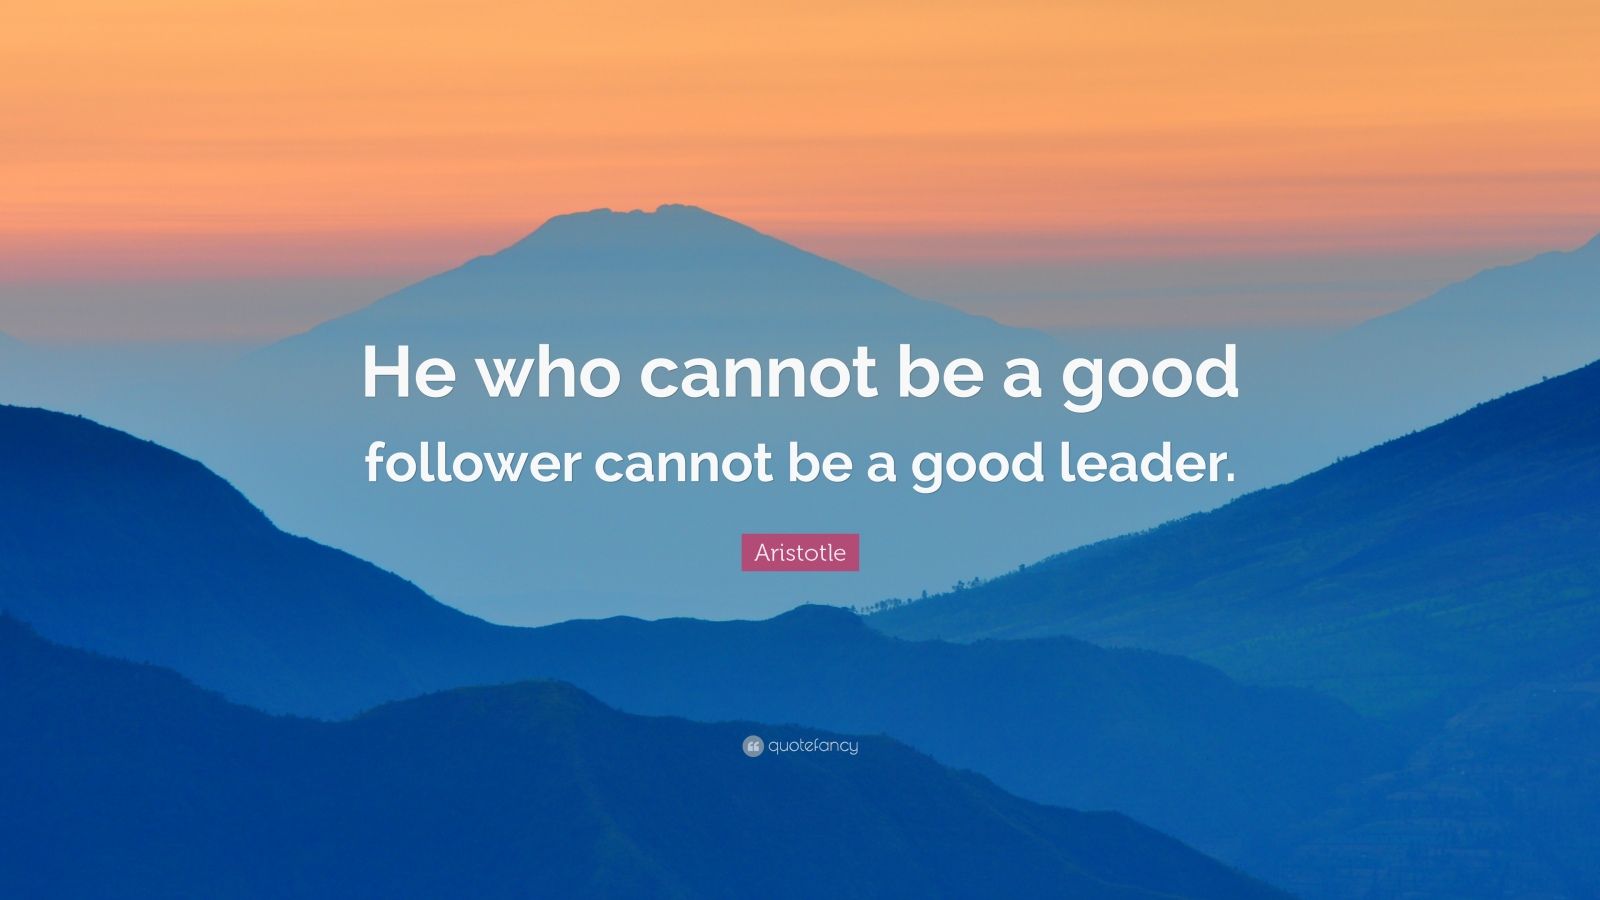 Aristotle Quote: “He who cannot be a good follower cannot be a good